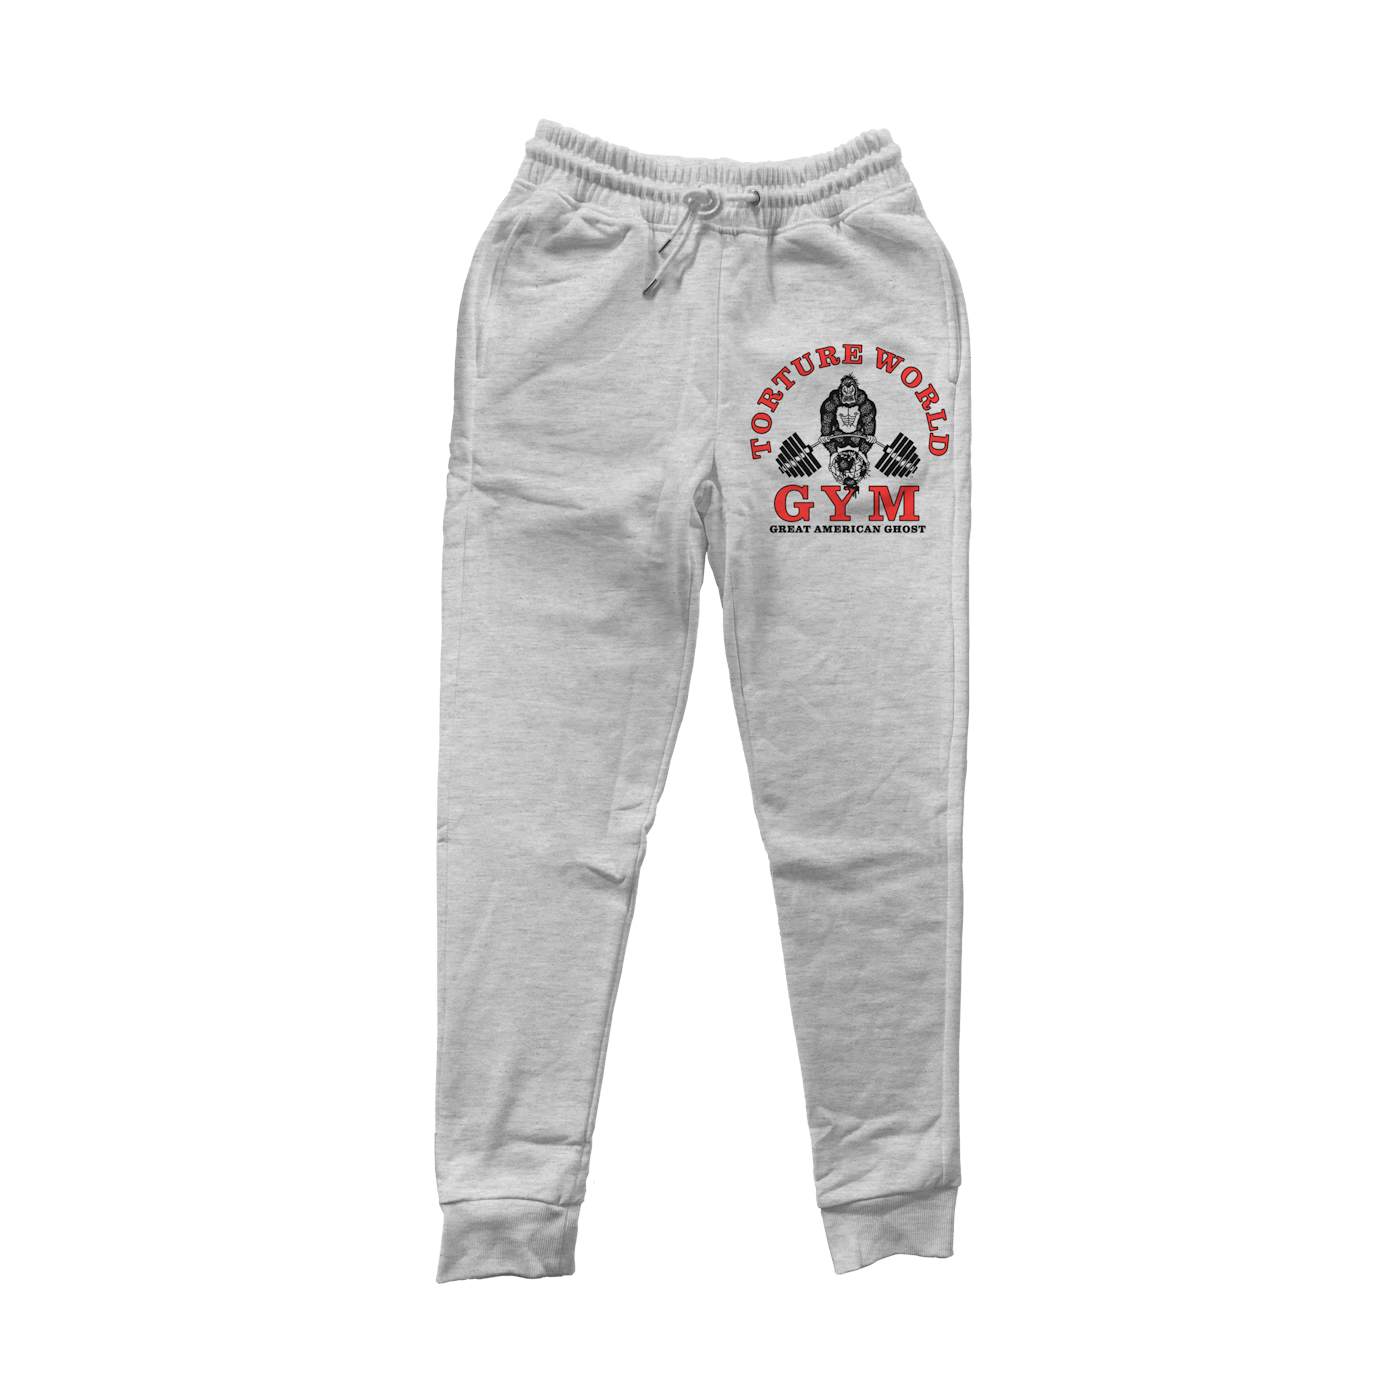 Great American Ghost - Torture World Gym Joggers